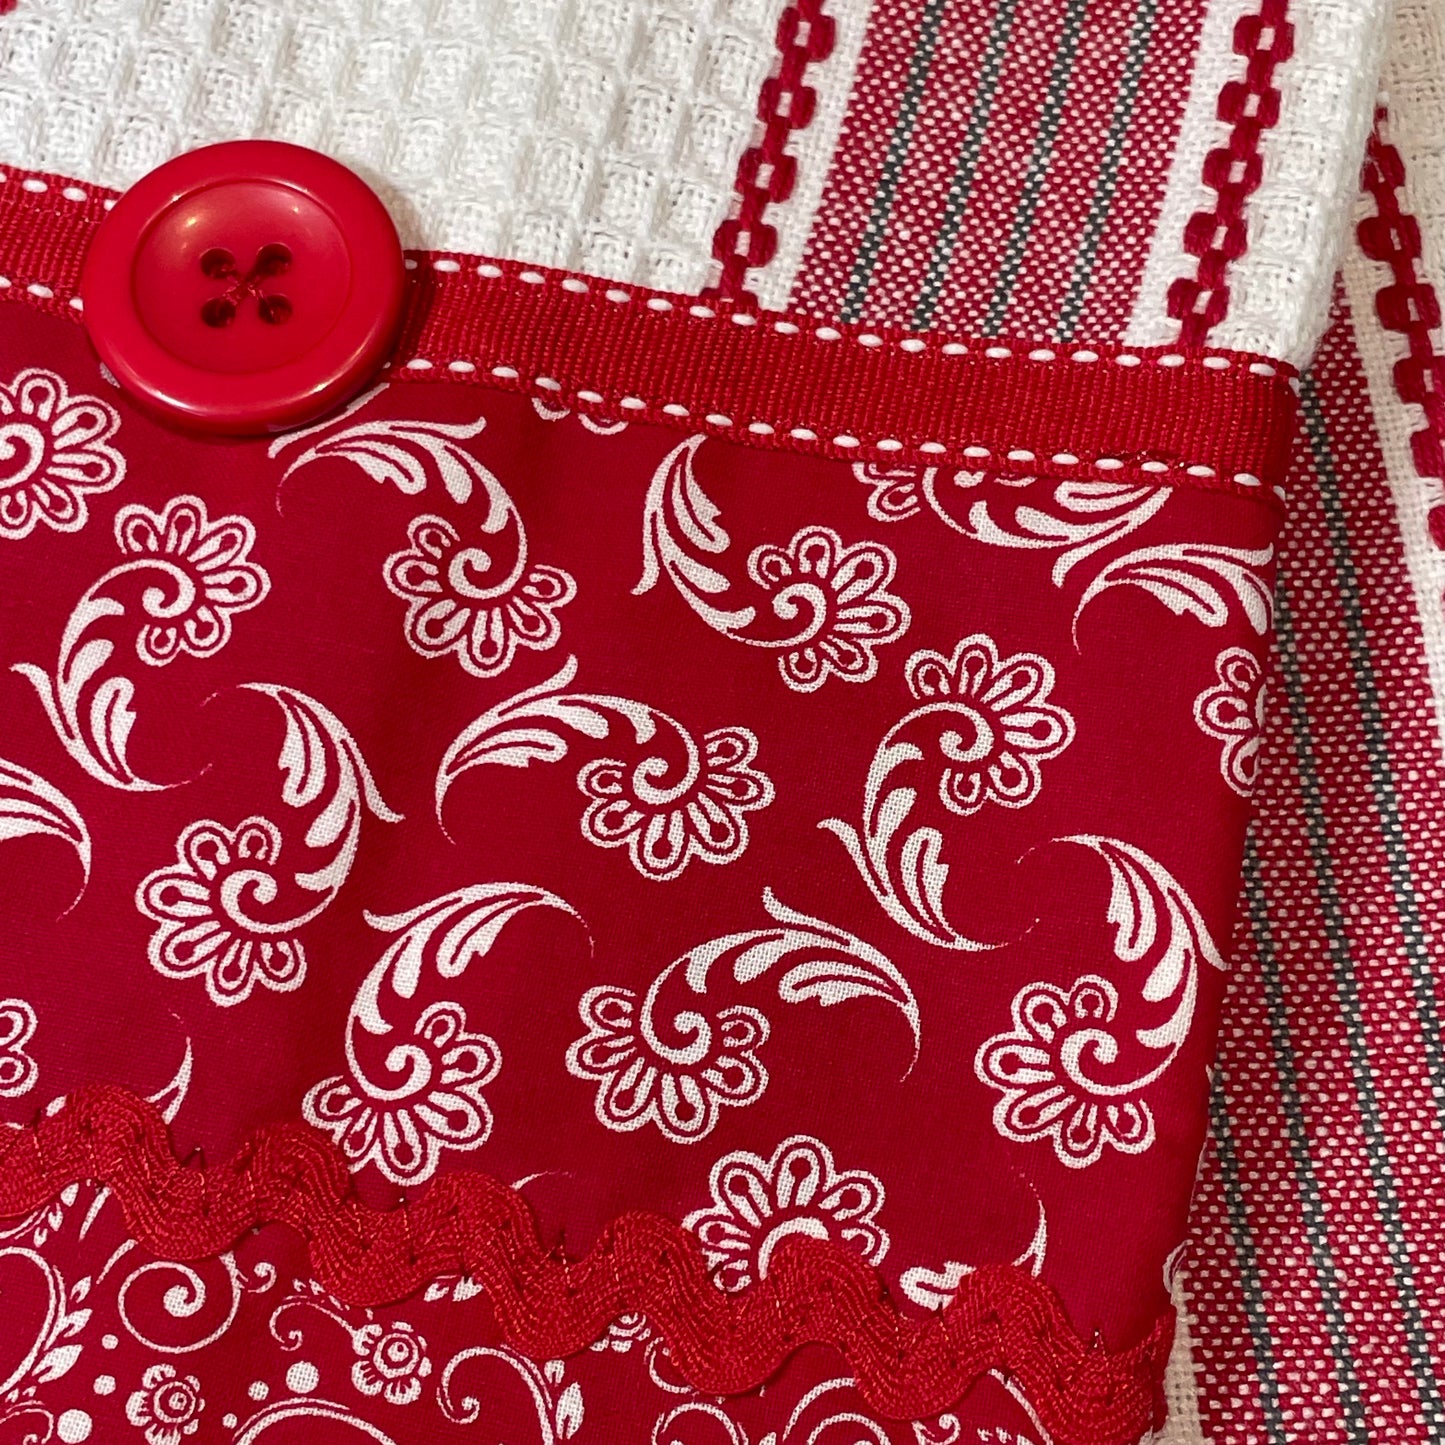 Country Style Red and White Dish Towel. Red and white toweling with quilt cotton, ribbon and button embellishments. Part of a mix and match collection. Browse all the products and follow along on the Home Stitchery Decor YouTube Channel.